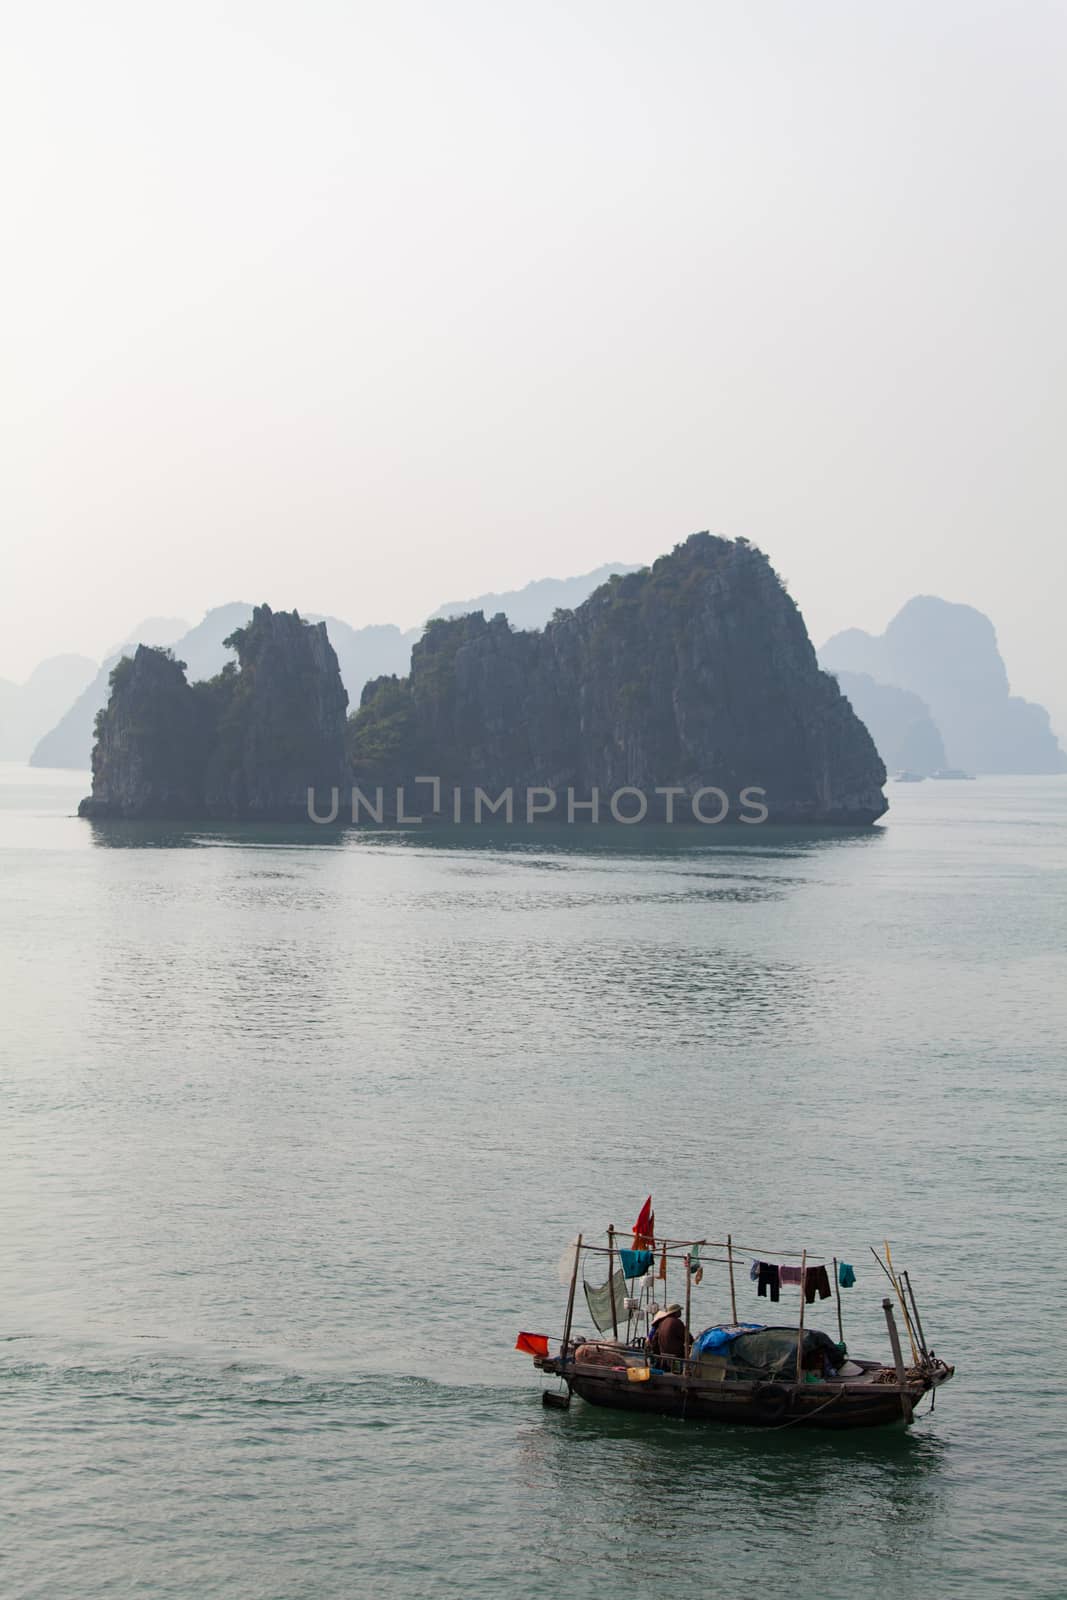 Ha Long Bay, Vietnam, towering limestone islands with traditional fishing boat by kgboxford